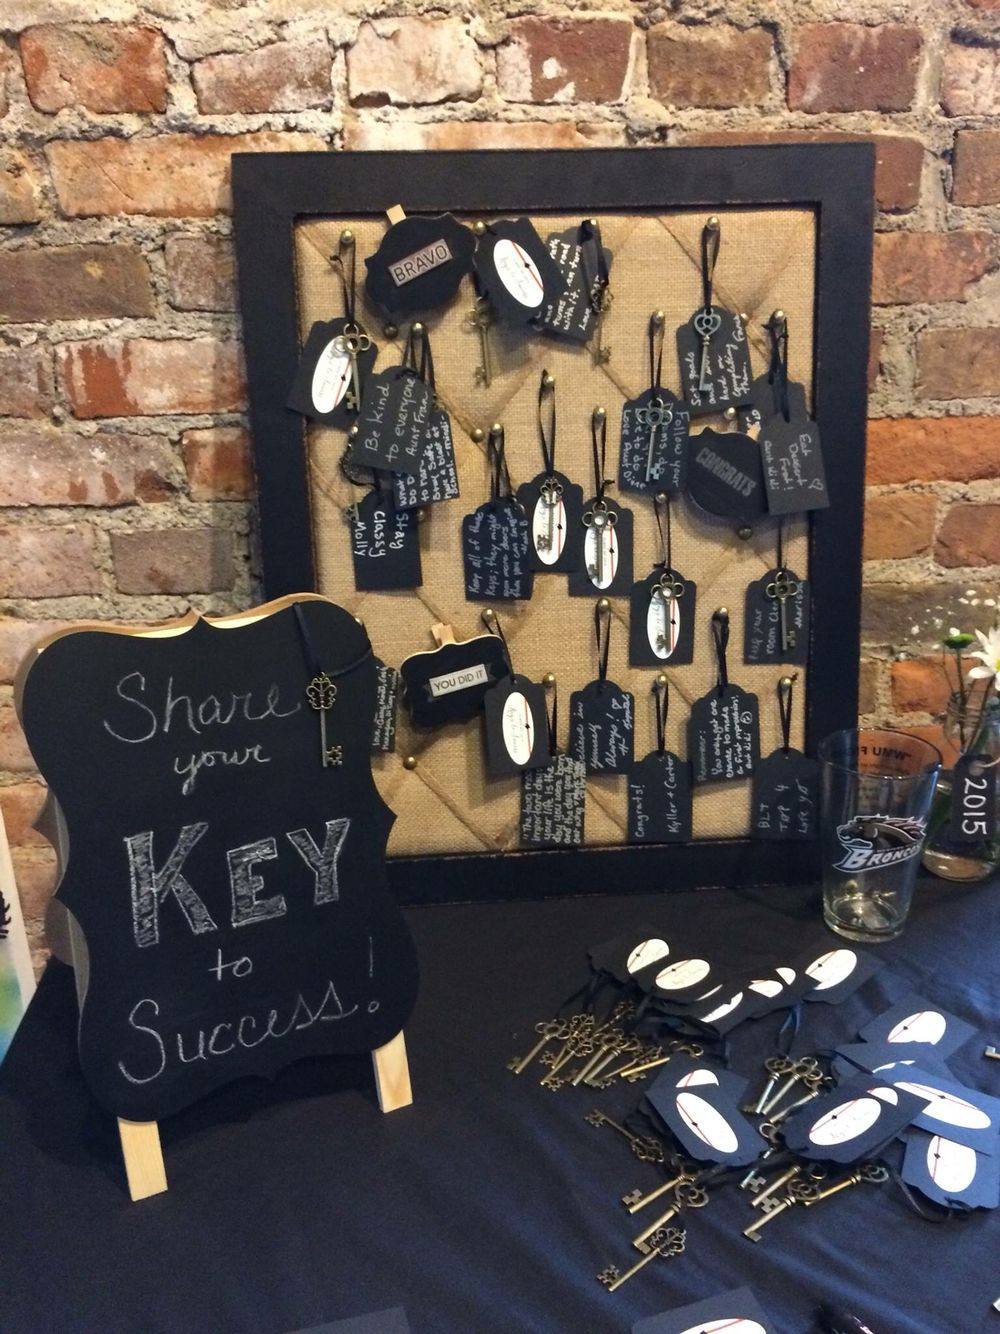 College Graduation Party Themes And Ideas
 Grad party "Keys to Success" table